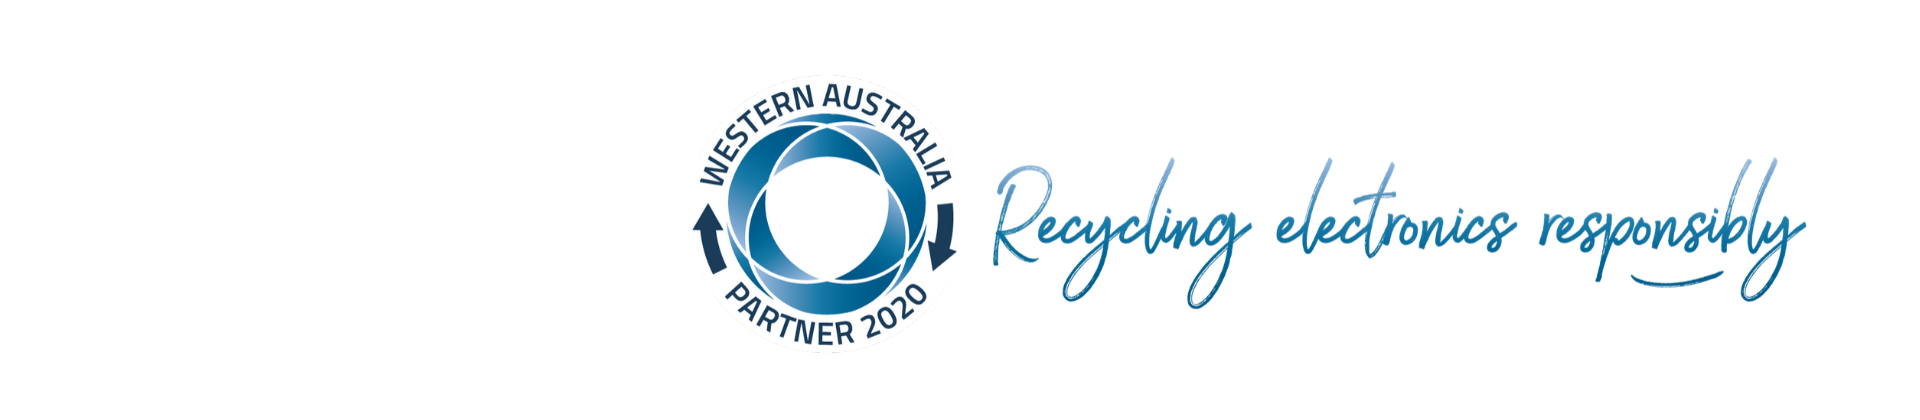 Recycling electronics responsibly partner 2020